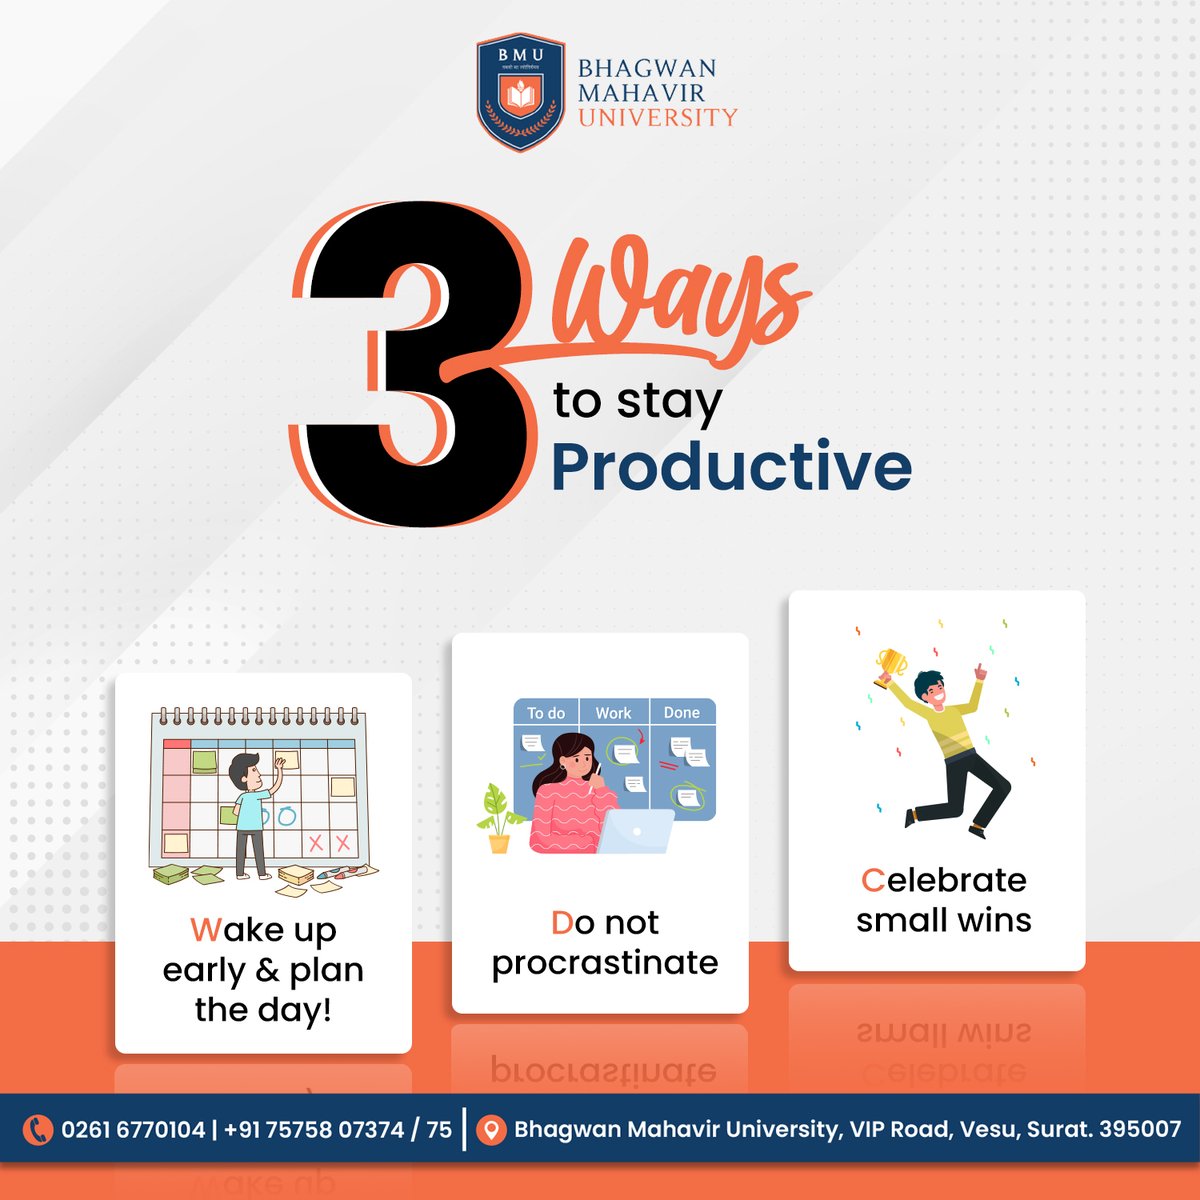 Your potential with simple habits that keep you moving forward every day.

#productive #PotentialUnleashed #dailyhabits #productivityhacks #earlyrisers #noprocrastination #smallwinscelebration